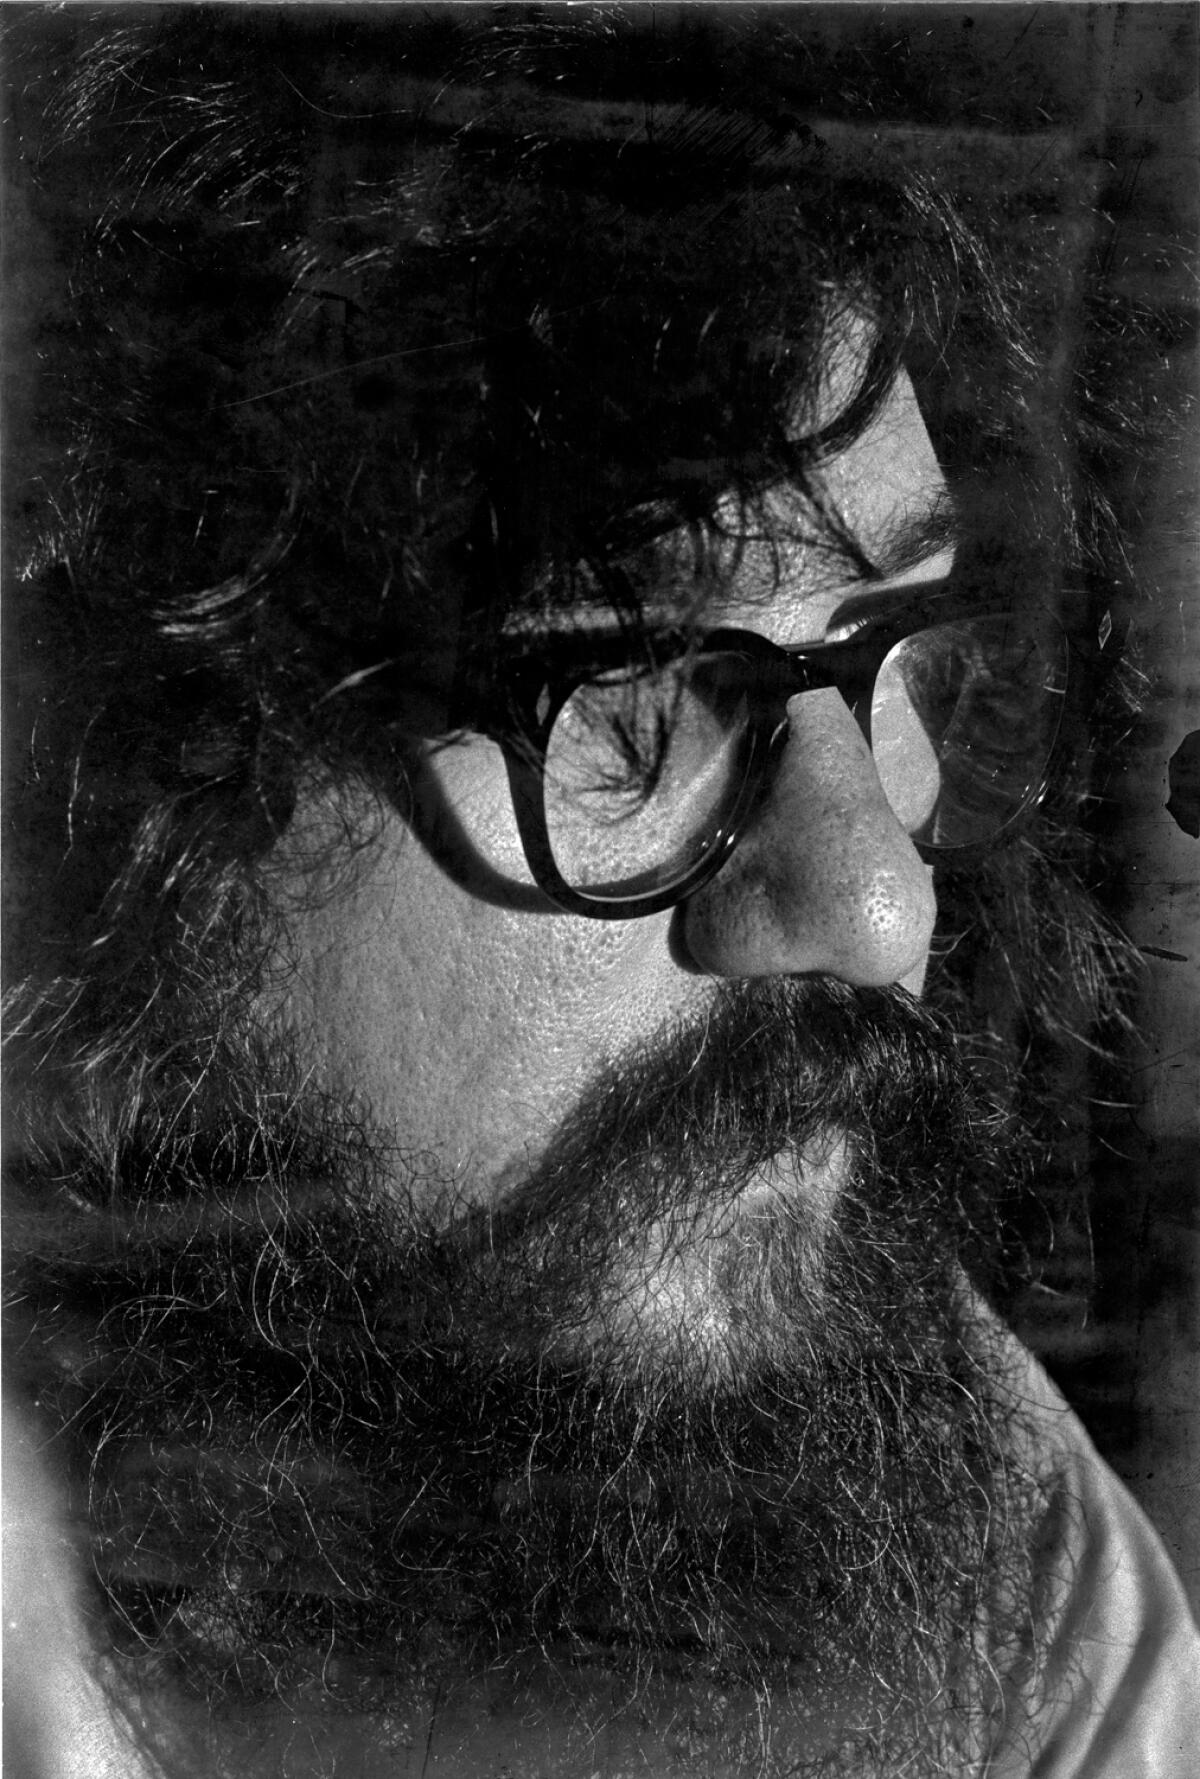 Close-up of Gerald Locklin, with thick glasses, shaggy hair and beard